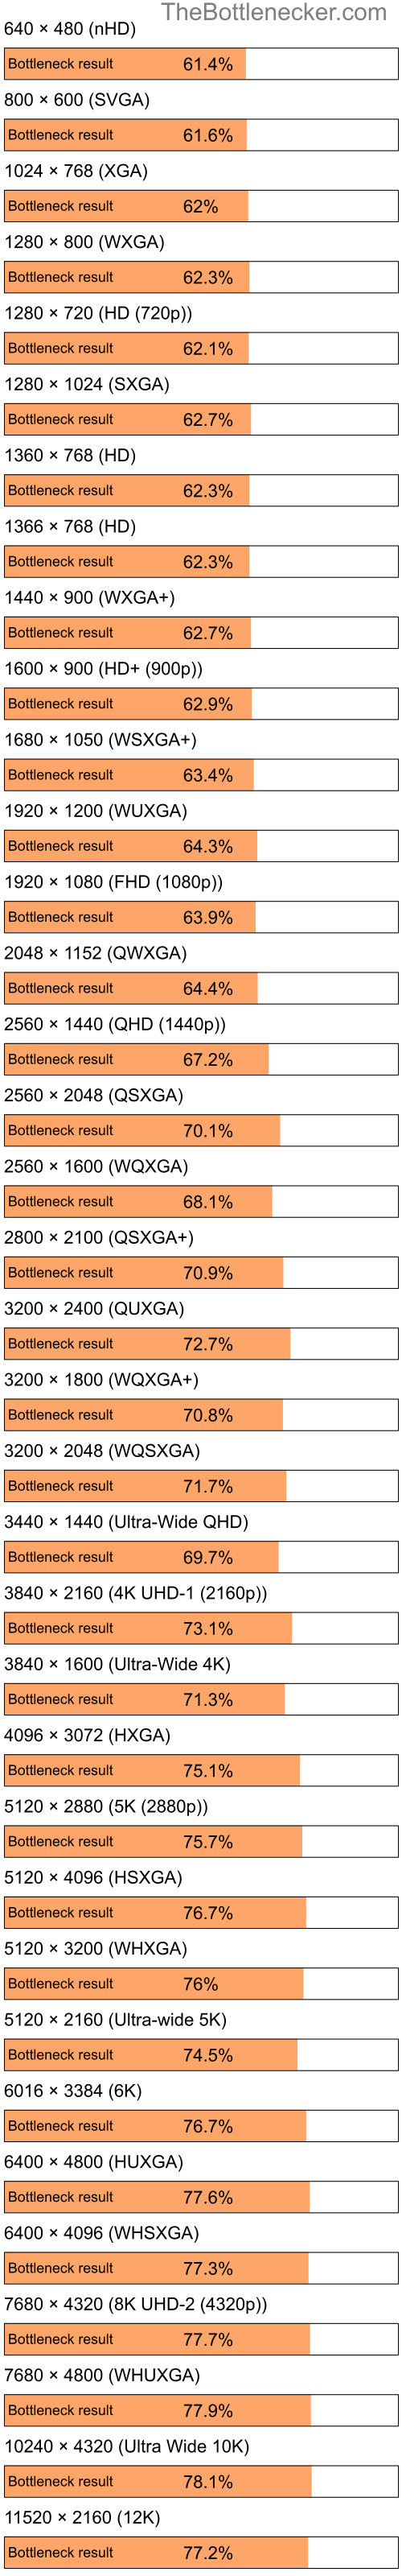 Bottleneck results by resolution for Intel Celeron and AMD Mobility Radeon HD 2400 in General Tasks